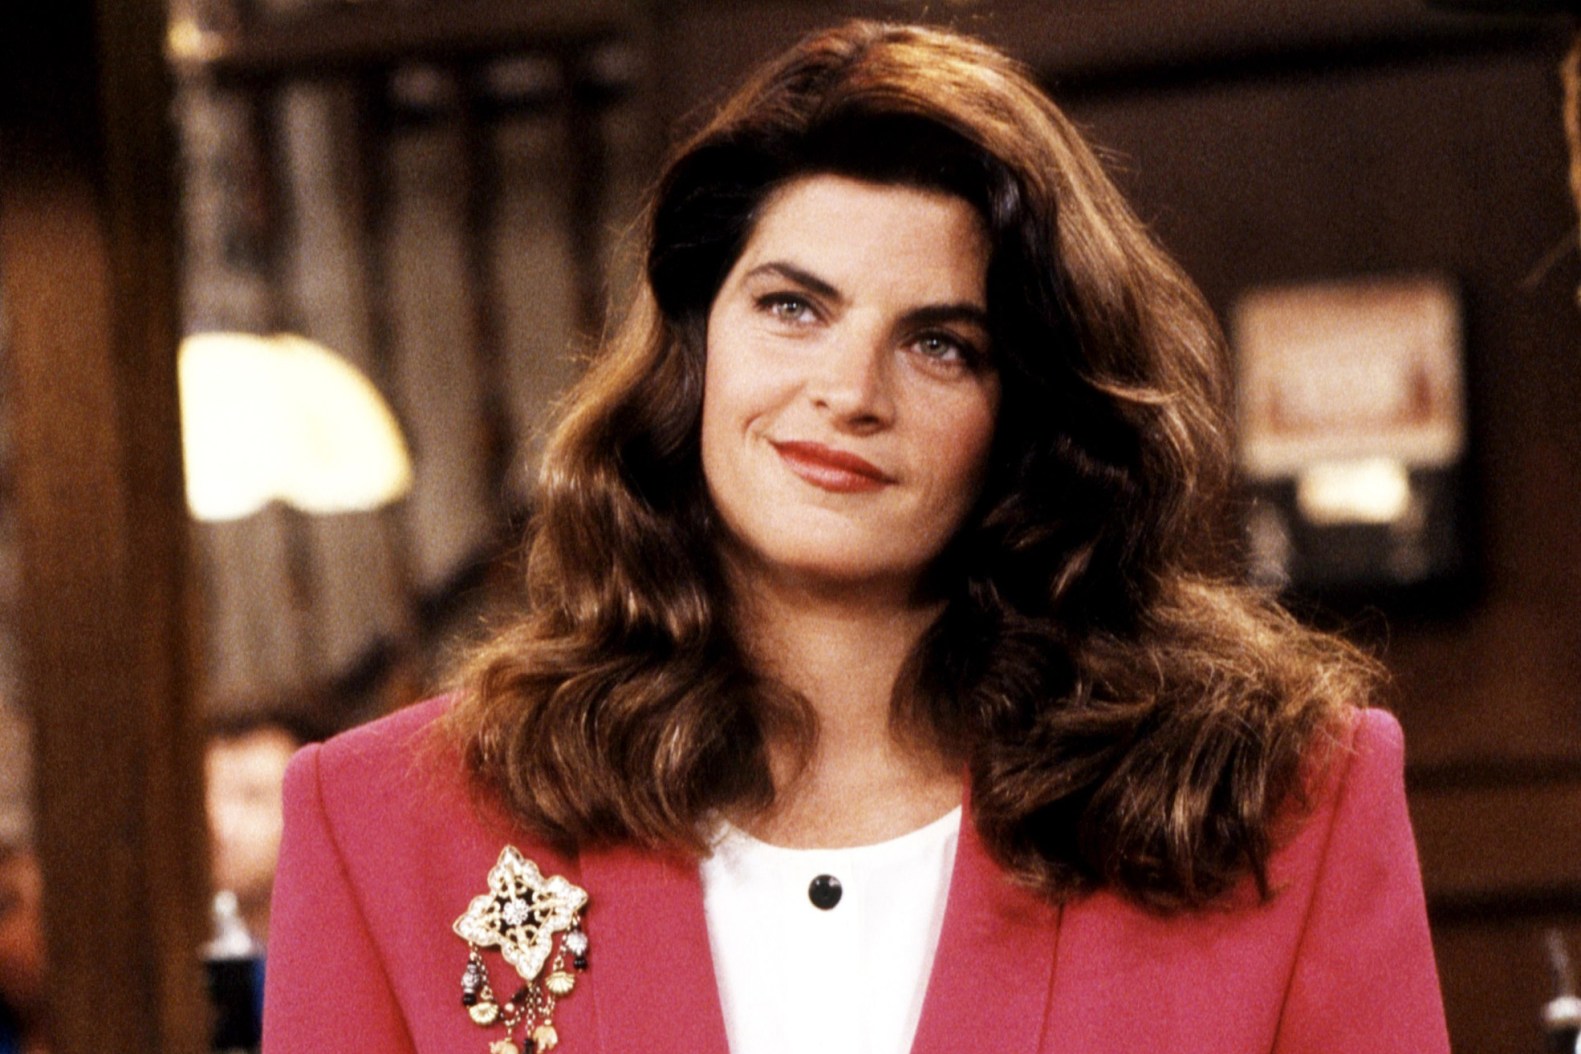 dimple manik recommends kirstie alley hot pics pic